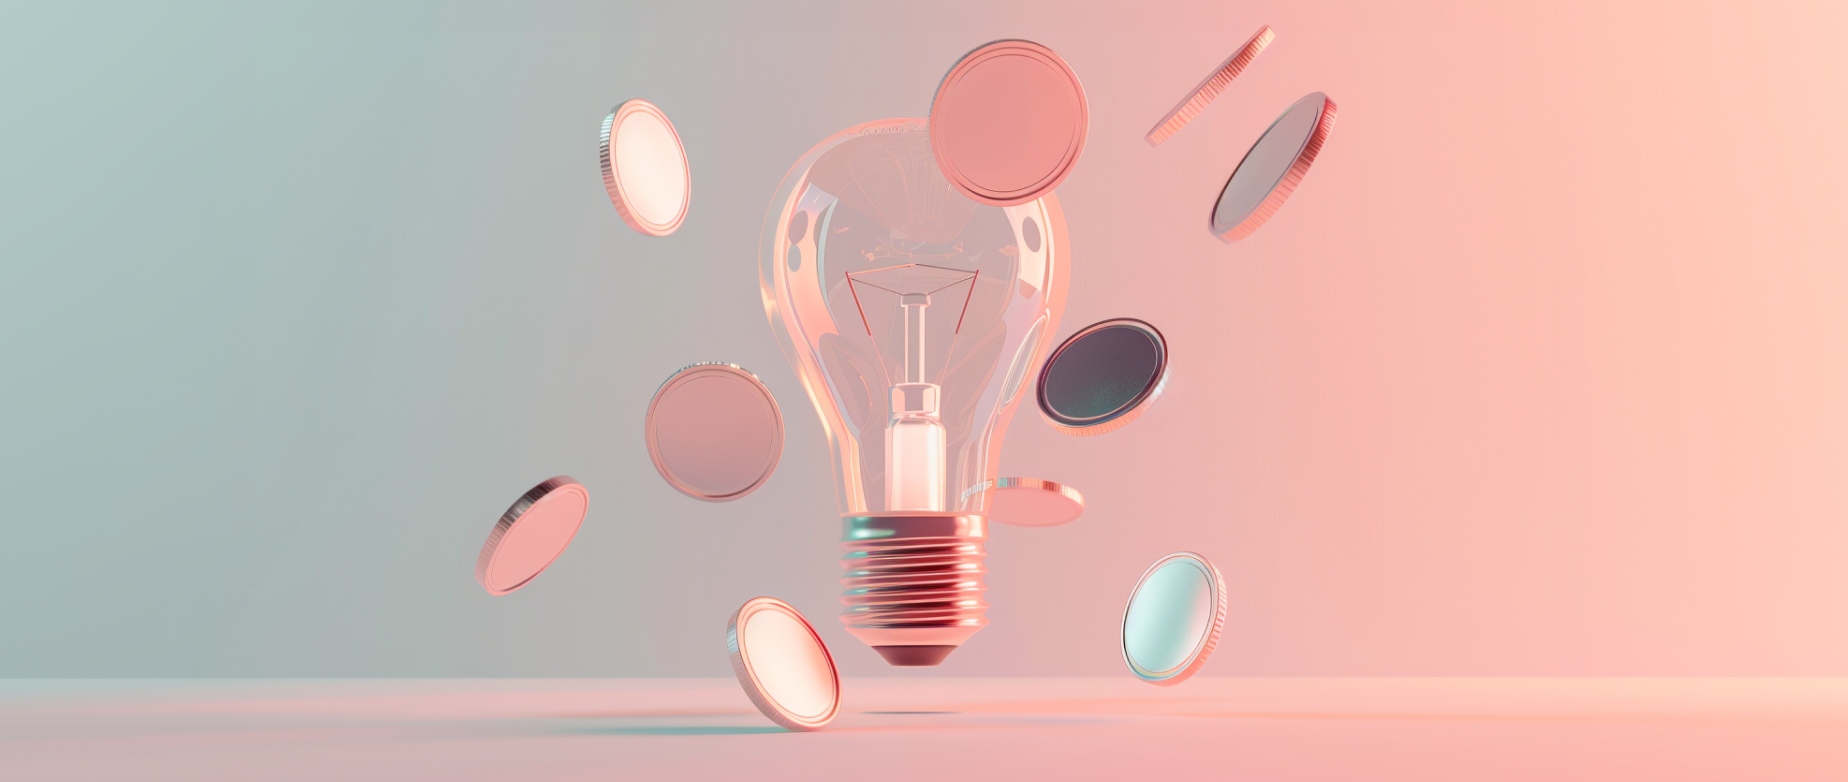 A lightbulb surrounded by falling silver coins on a blue and peach background.